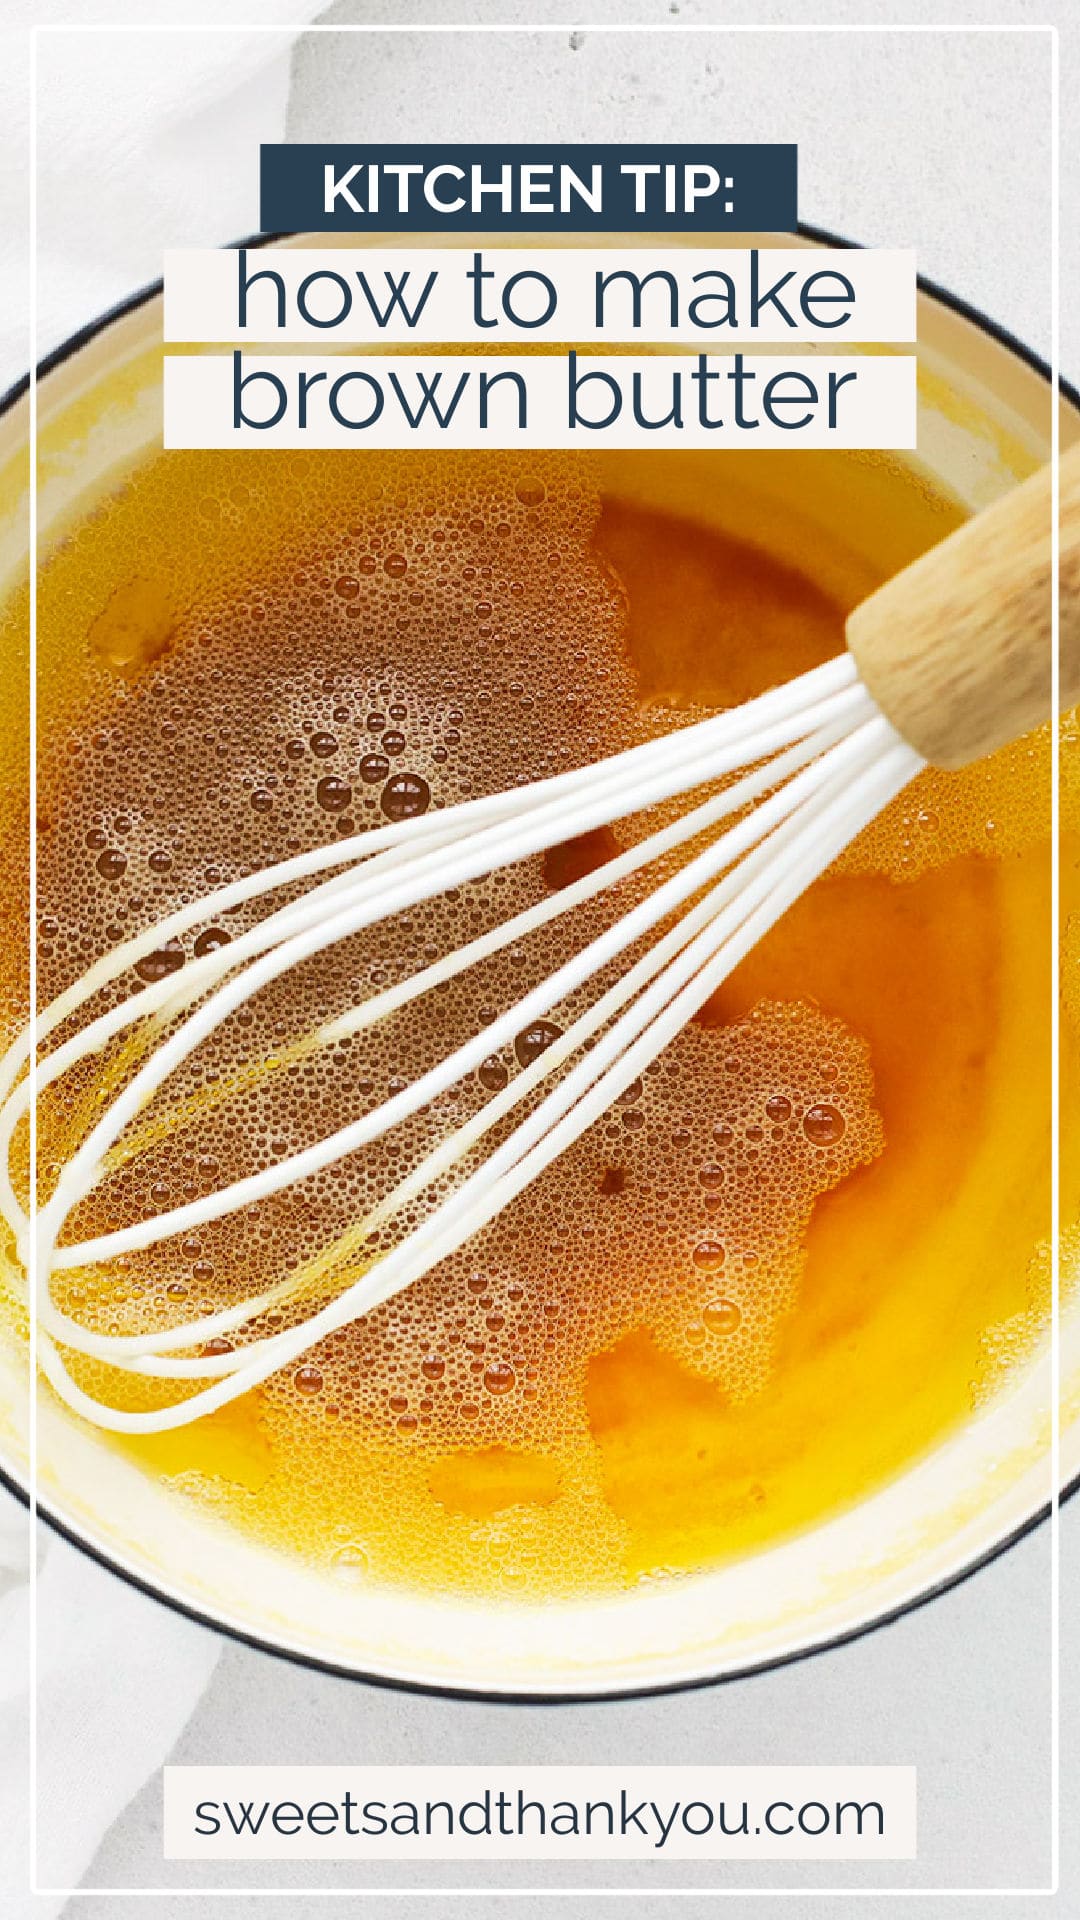 How to Brown Butter - If you've ever wondered how to make brown butter, you're in luck! It's EASY and adds gorgeous flavor to so many recipes. // Brown Butter Tutorial // How to make browned butter // Kitchen Tips // Baking Tips // Sweets & Thank You Baking Tip